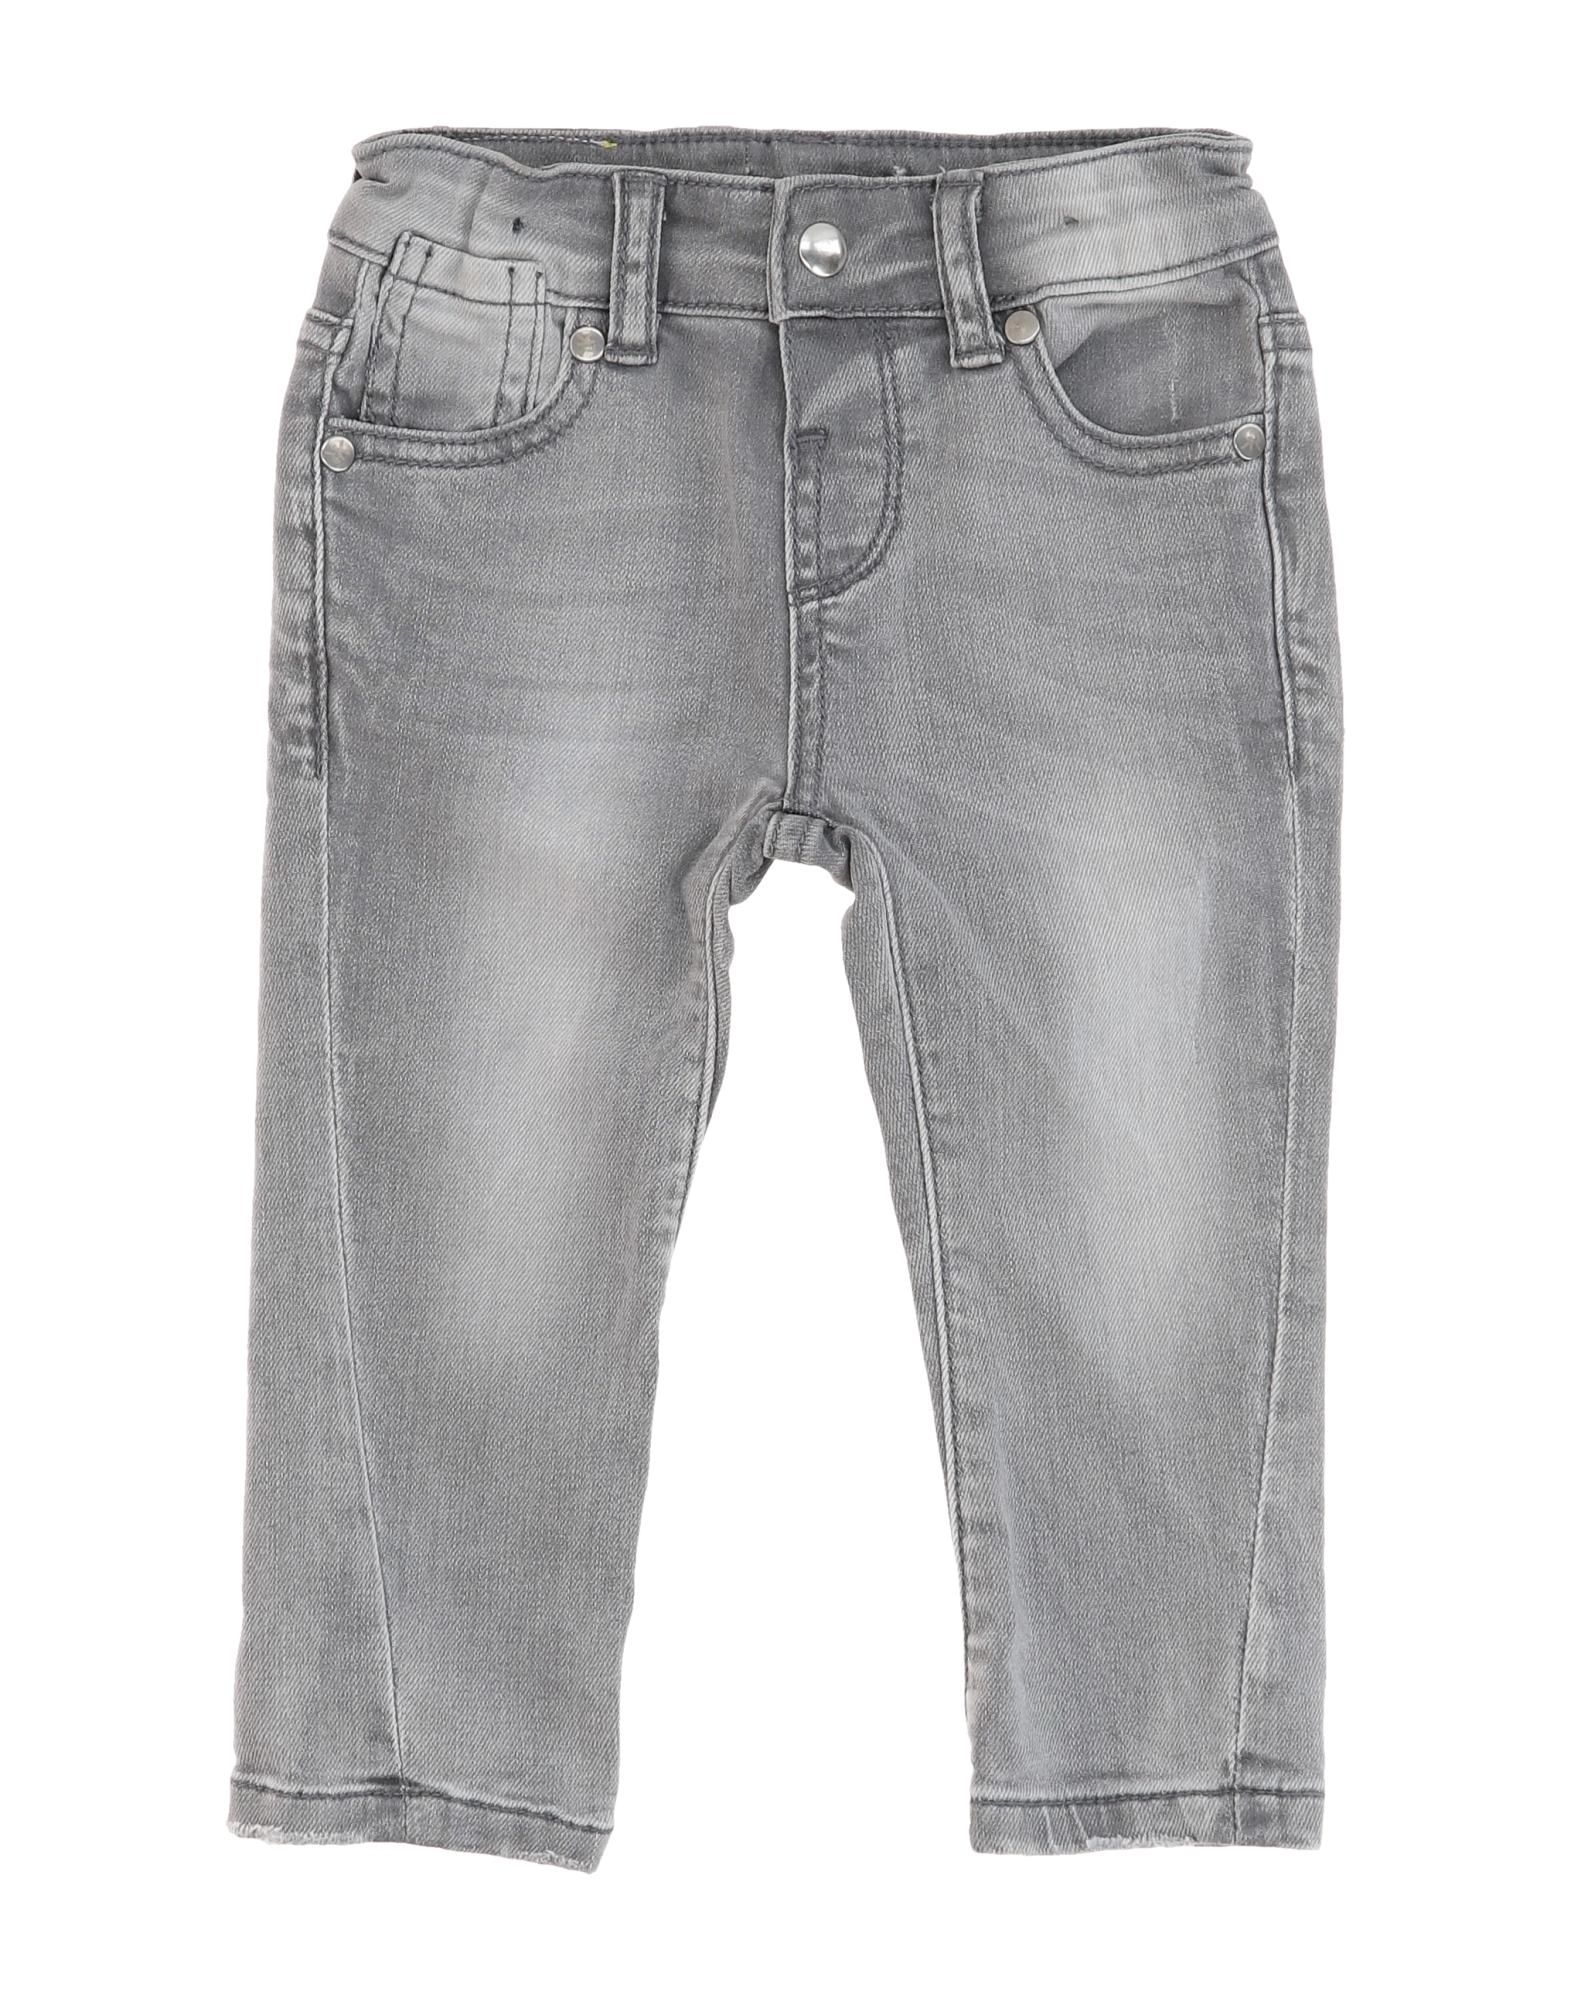 Ronnie Kay Kids' Jeans In Grey